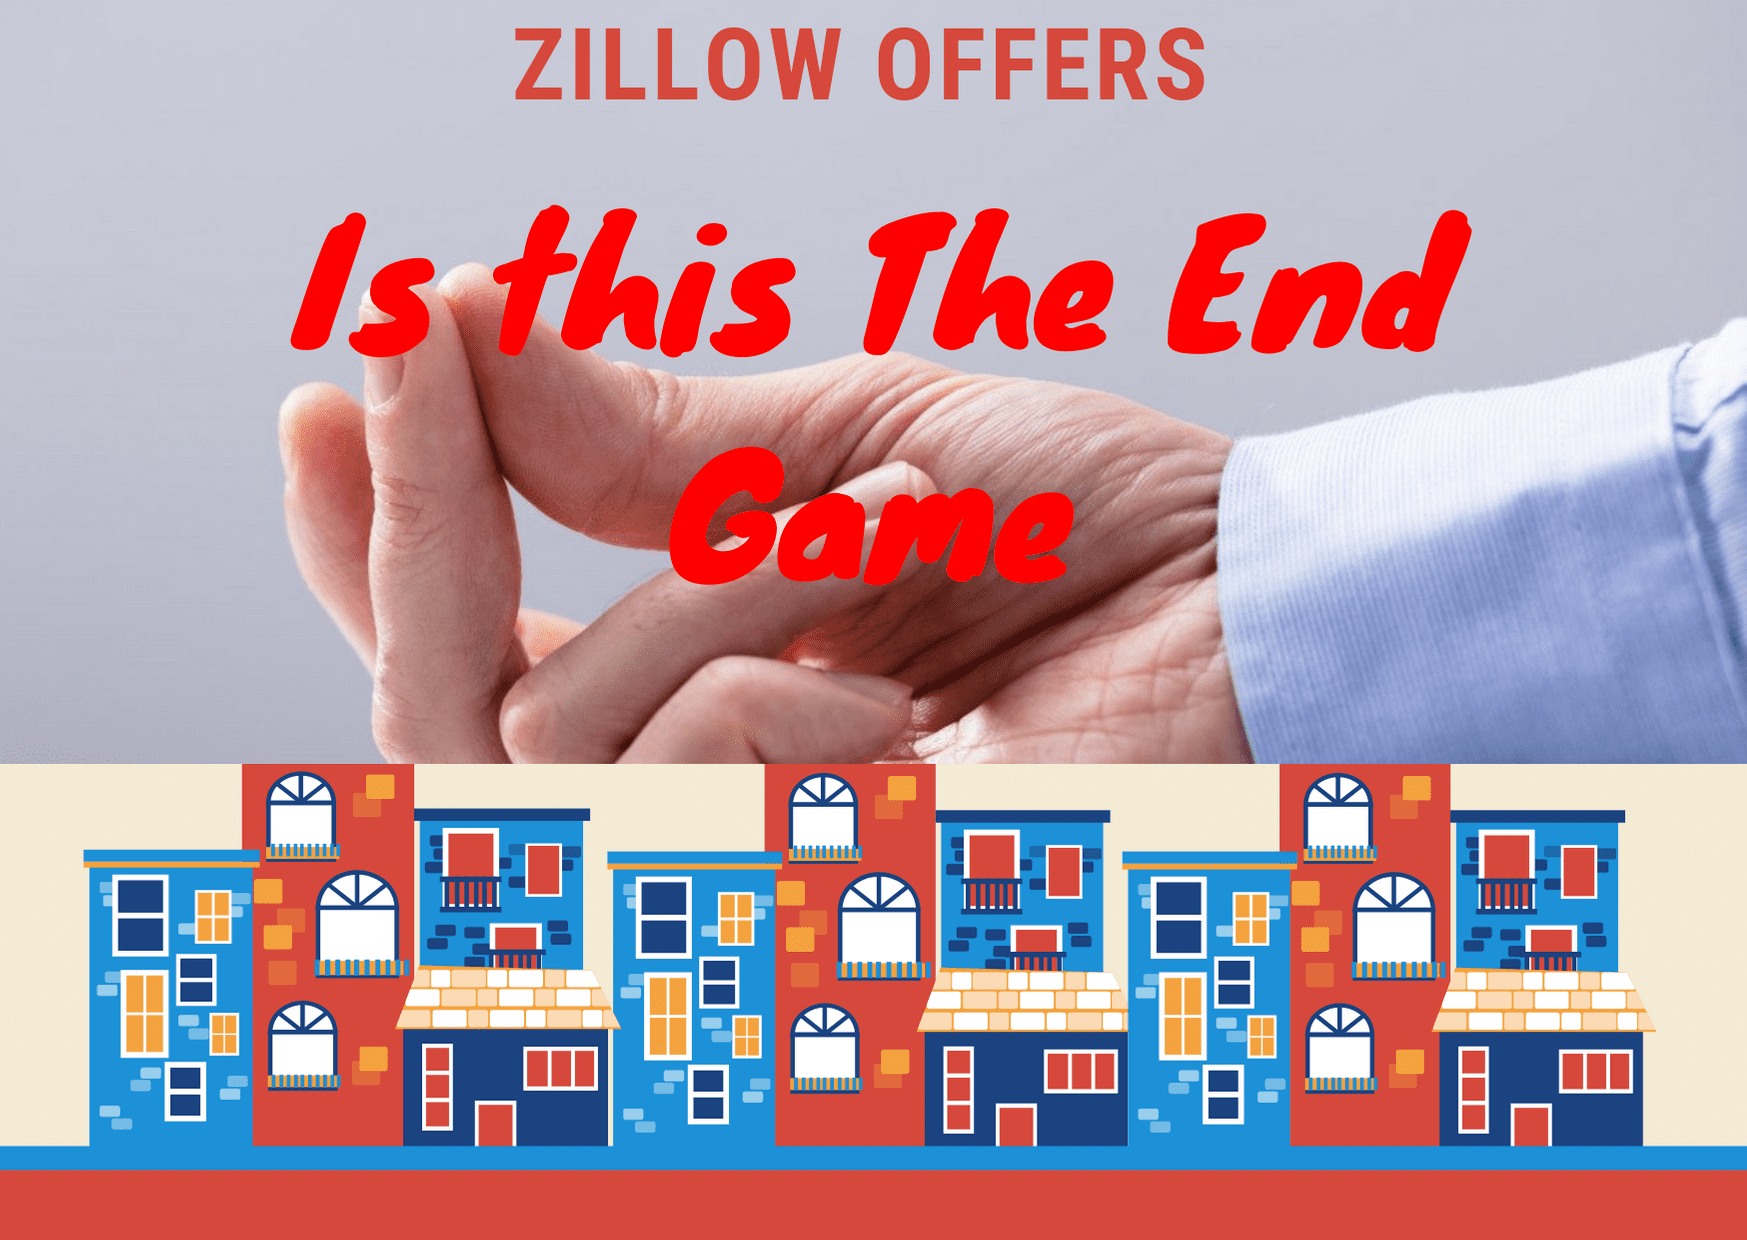 Zillow Offers The End Game For Zillow